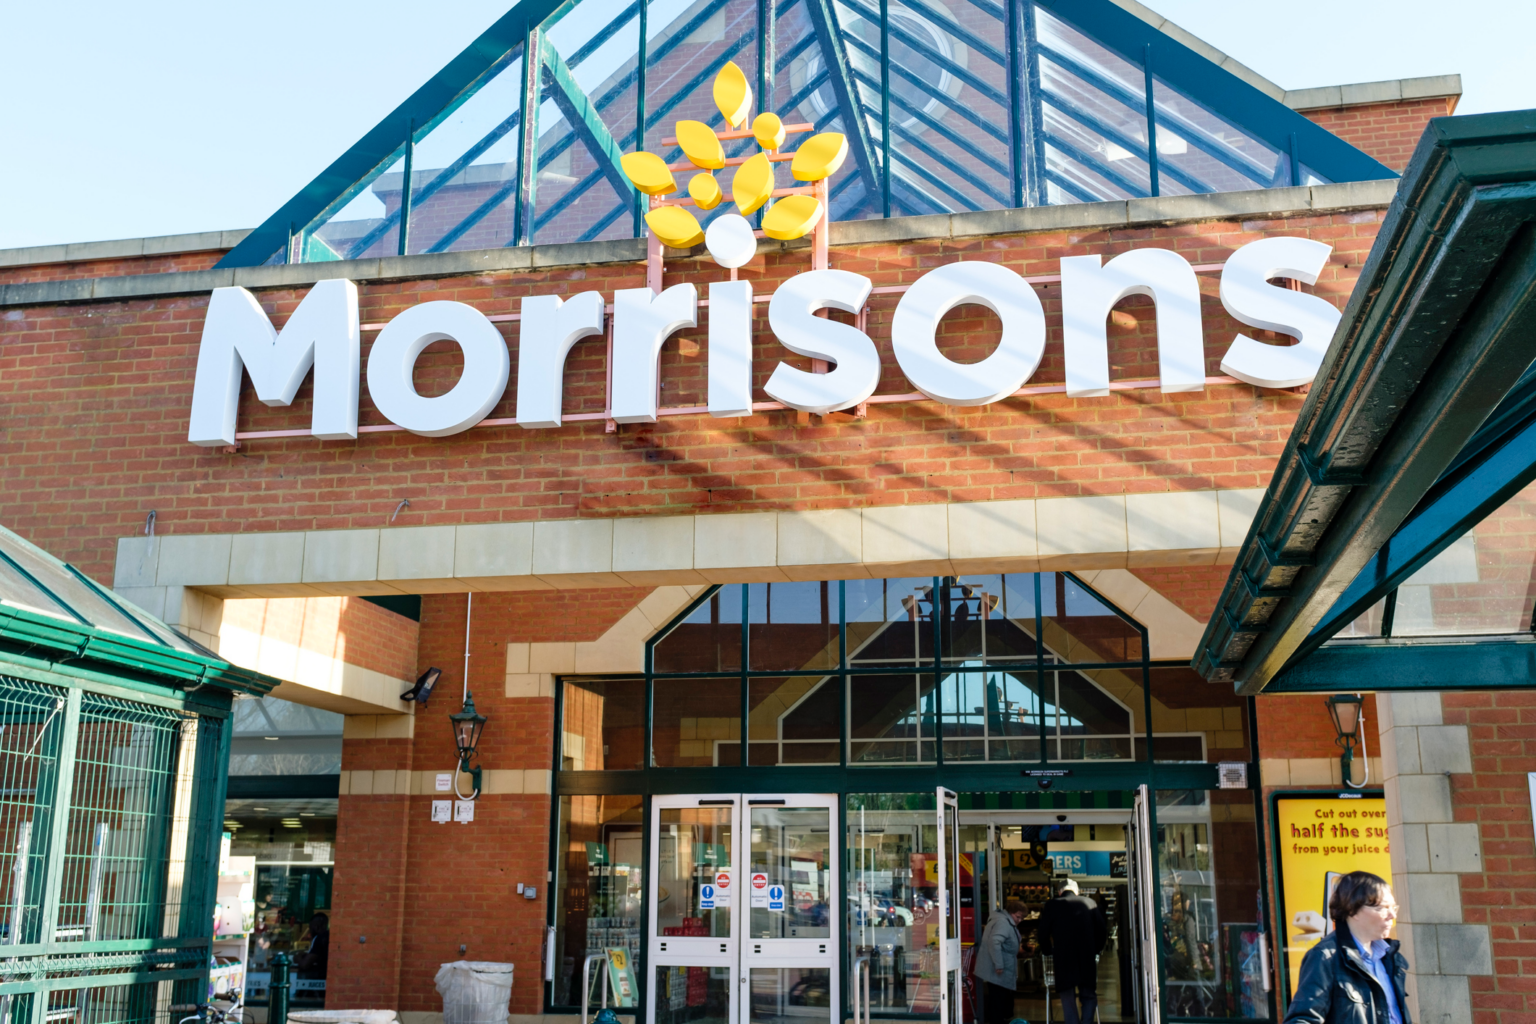 External view of Morrisons supermarket where, ahead of the busy 2023 peak trading period, Nuttall helped Morrisons reconfigure counter displays across 33 stores, nationwide in just 6 weeks